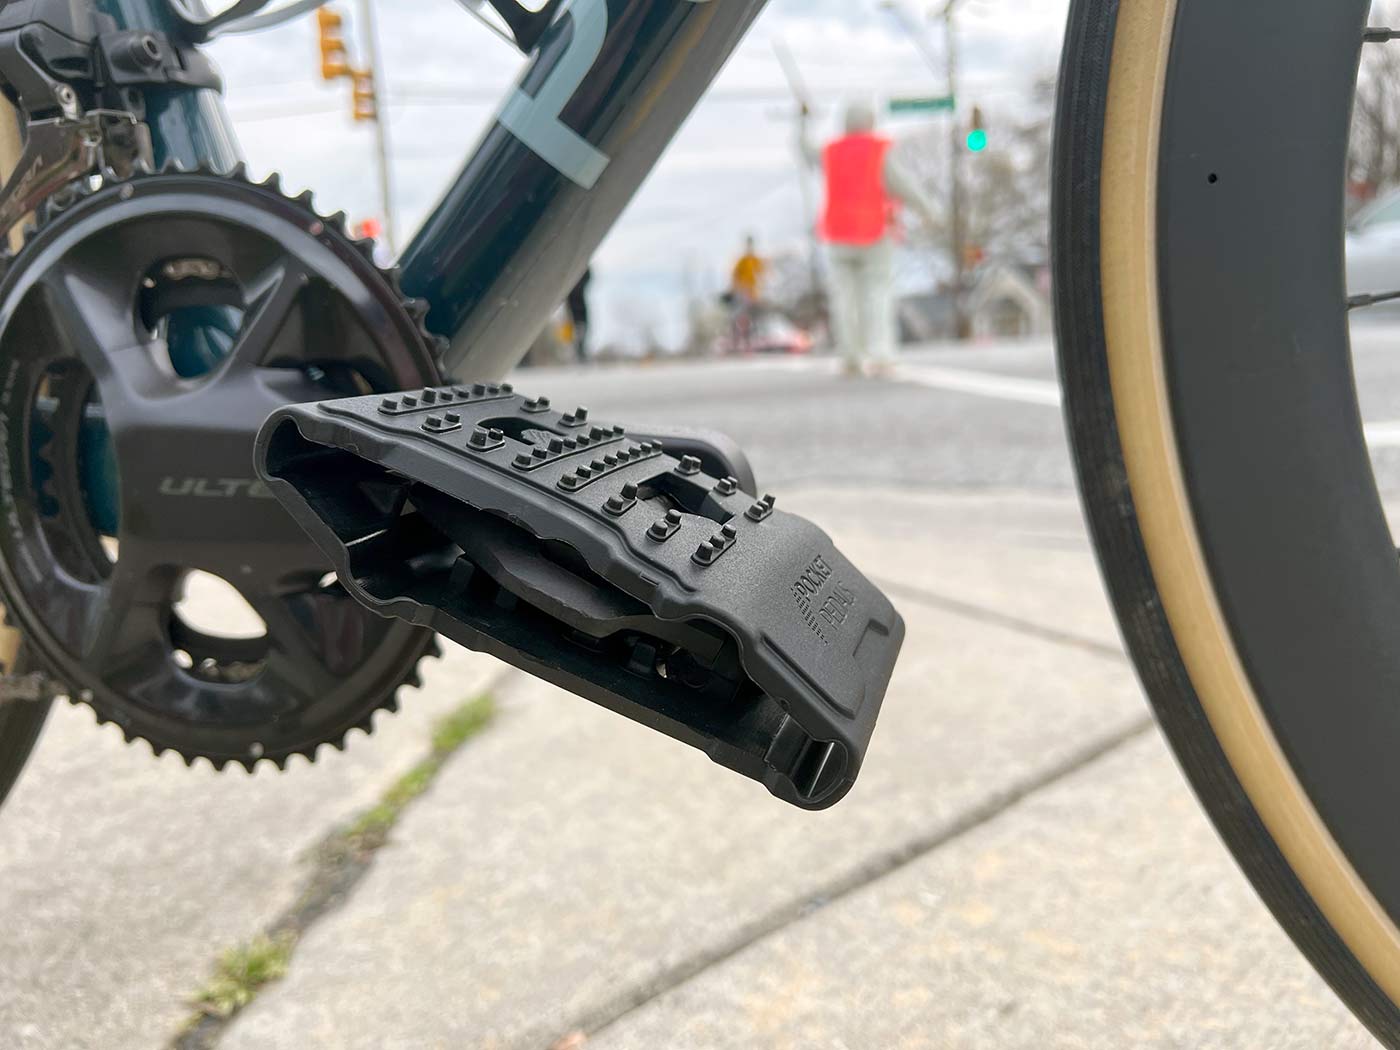 pocket pedals adapter turns any SPD road or mountain bike pedal into a platform pedal for easy commuting